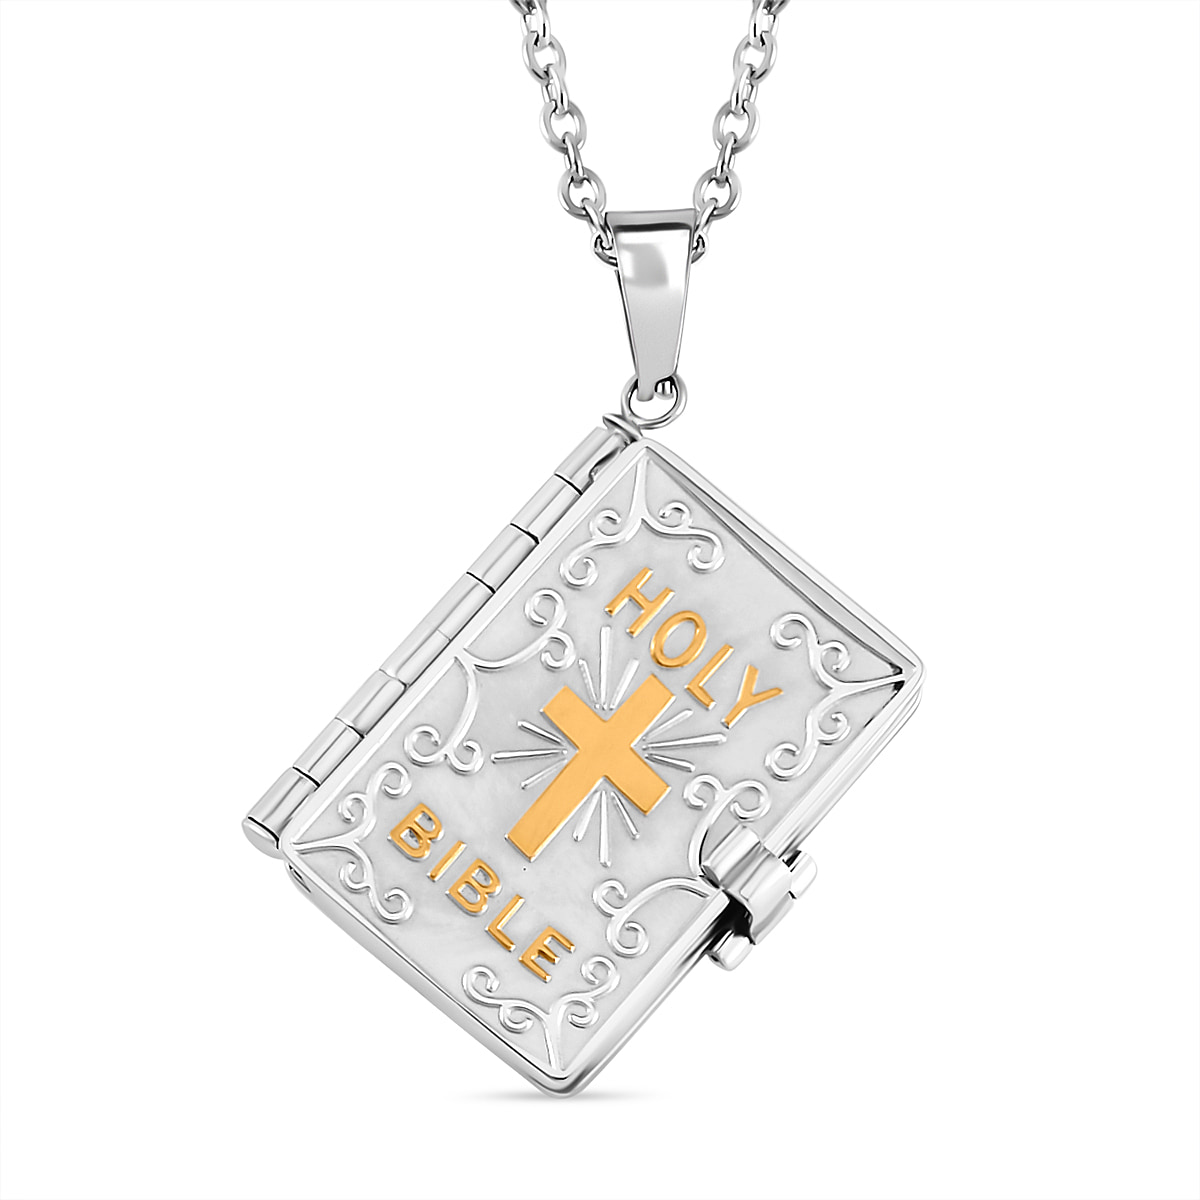 Holy Bible Openable Pendant With Chain and Presentation Gift Box (30inch + Slider)